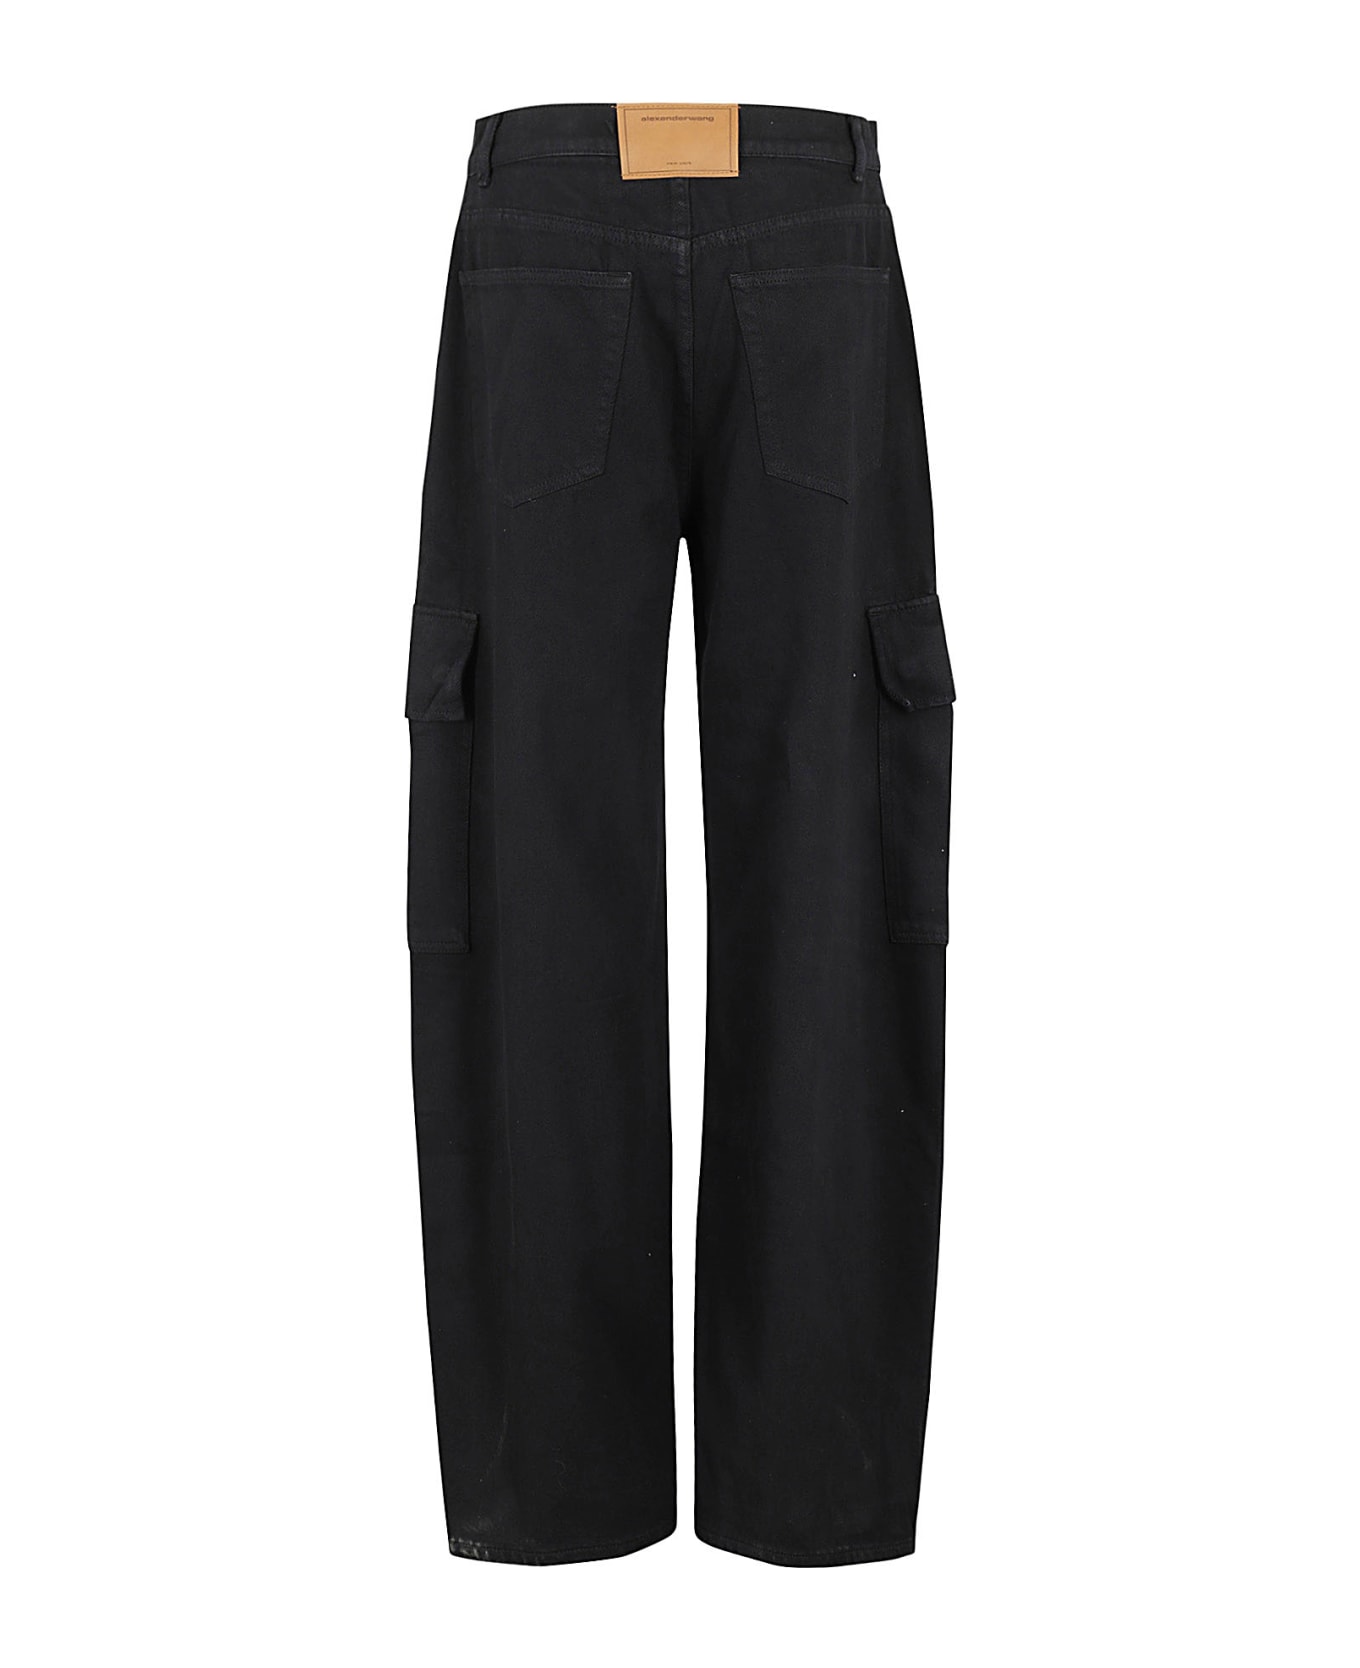 Alexander Wang Oversized Rounded Low Rise Jean Cargo Pocket